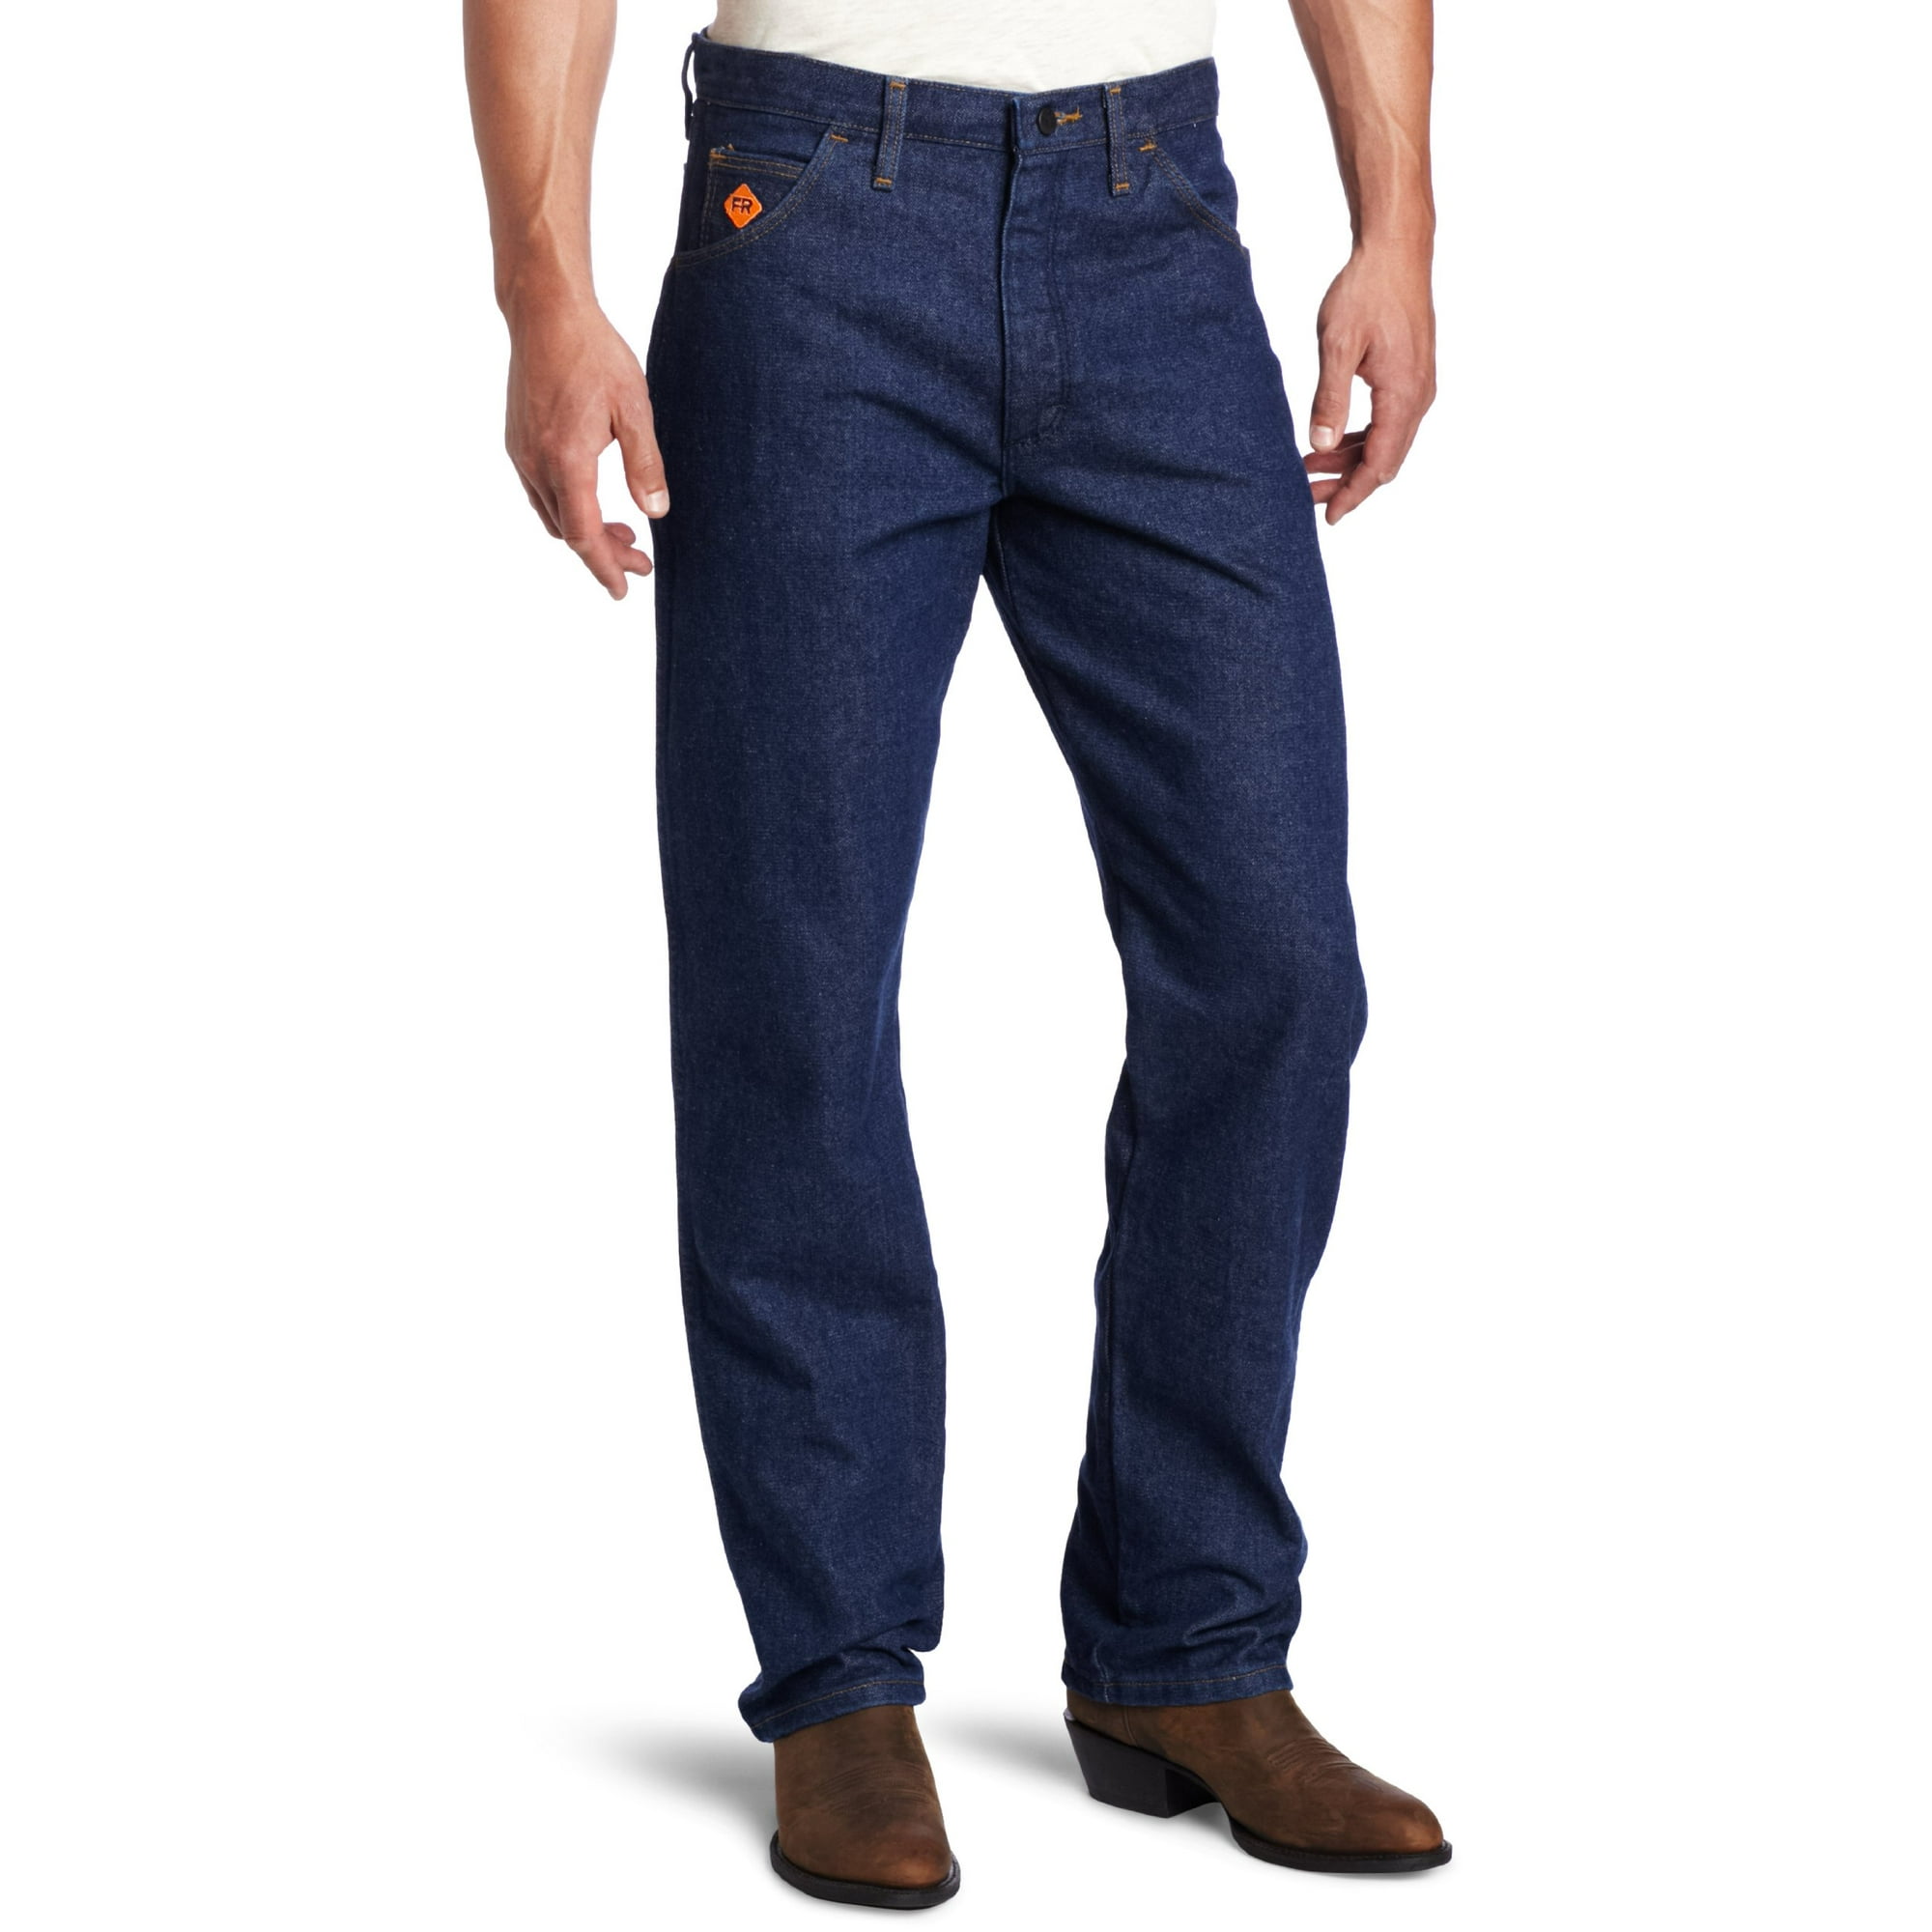 Wrangler Men's Flame Resistant Relaxed Fit Jean,Blue,42x30 | Walmart Canada